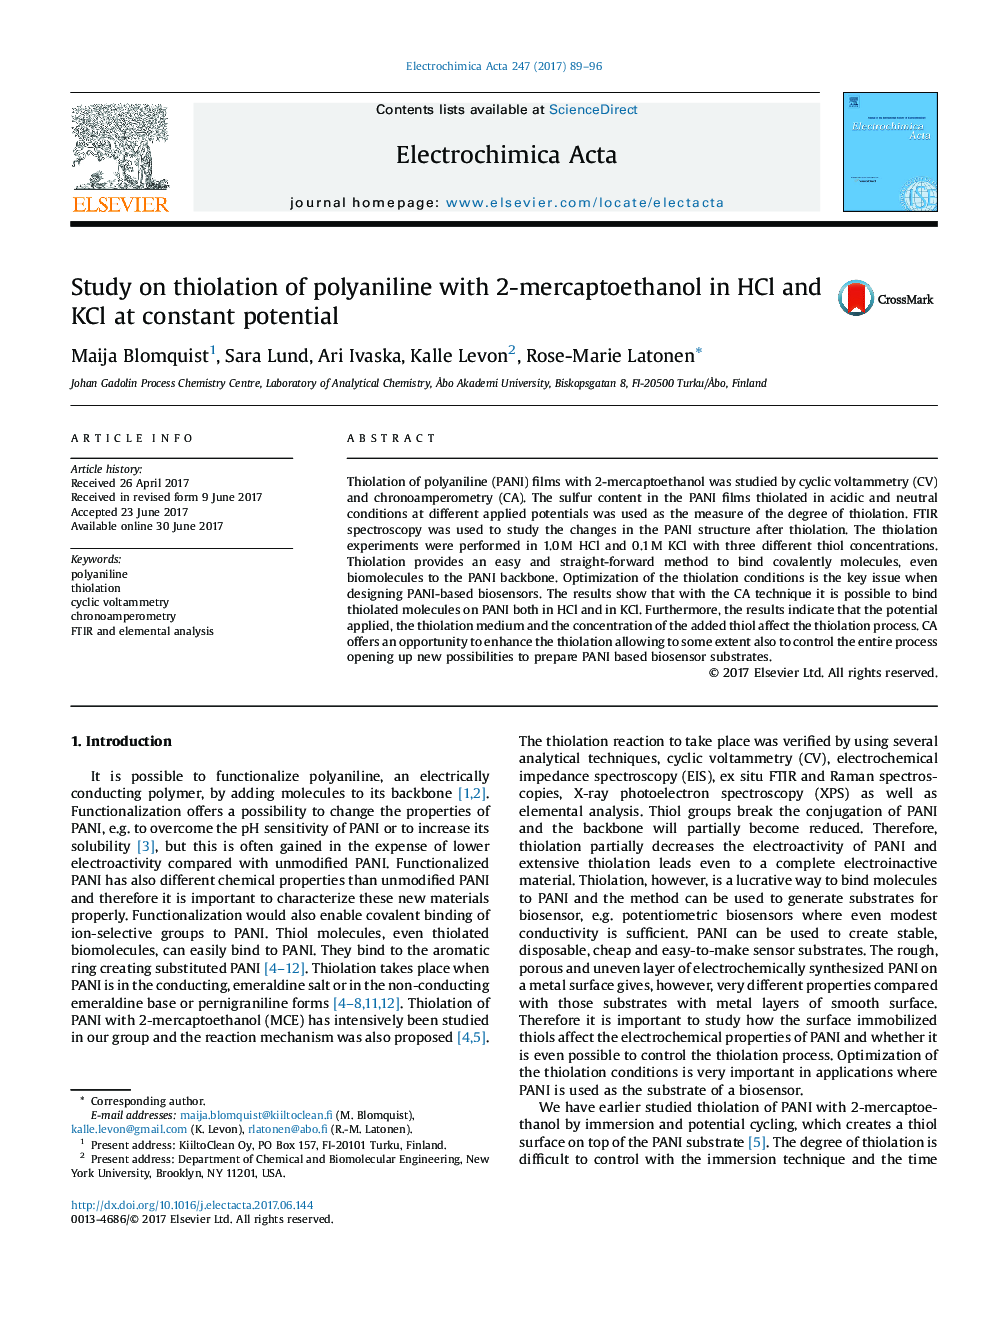 Study on thiolation of polyaniline with 2-mercaptoethanol in HCl and KCl at constant potential